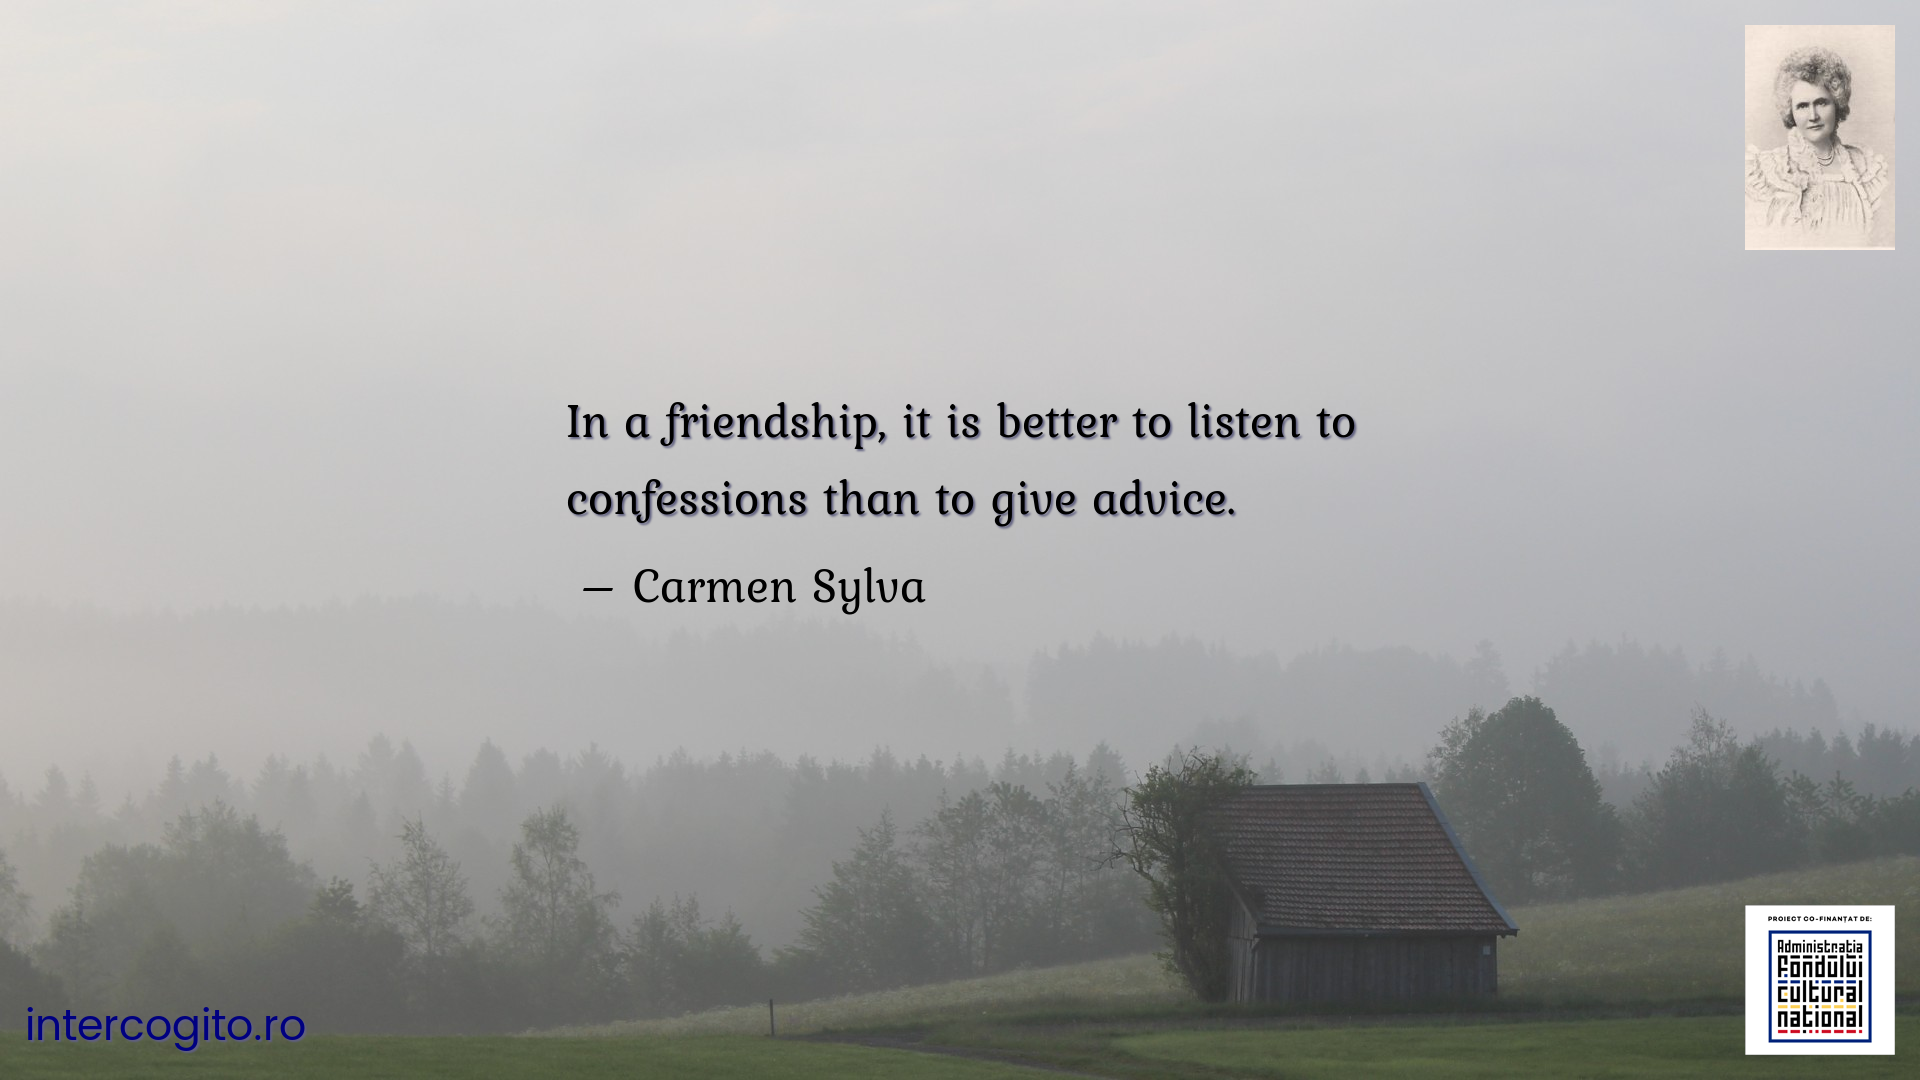 In a friendship, it is better to listen to confessions than to give advice.